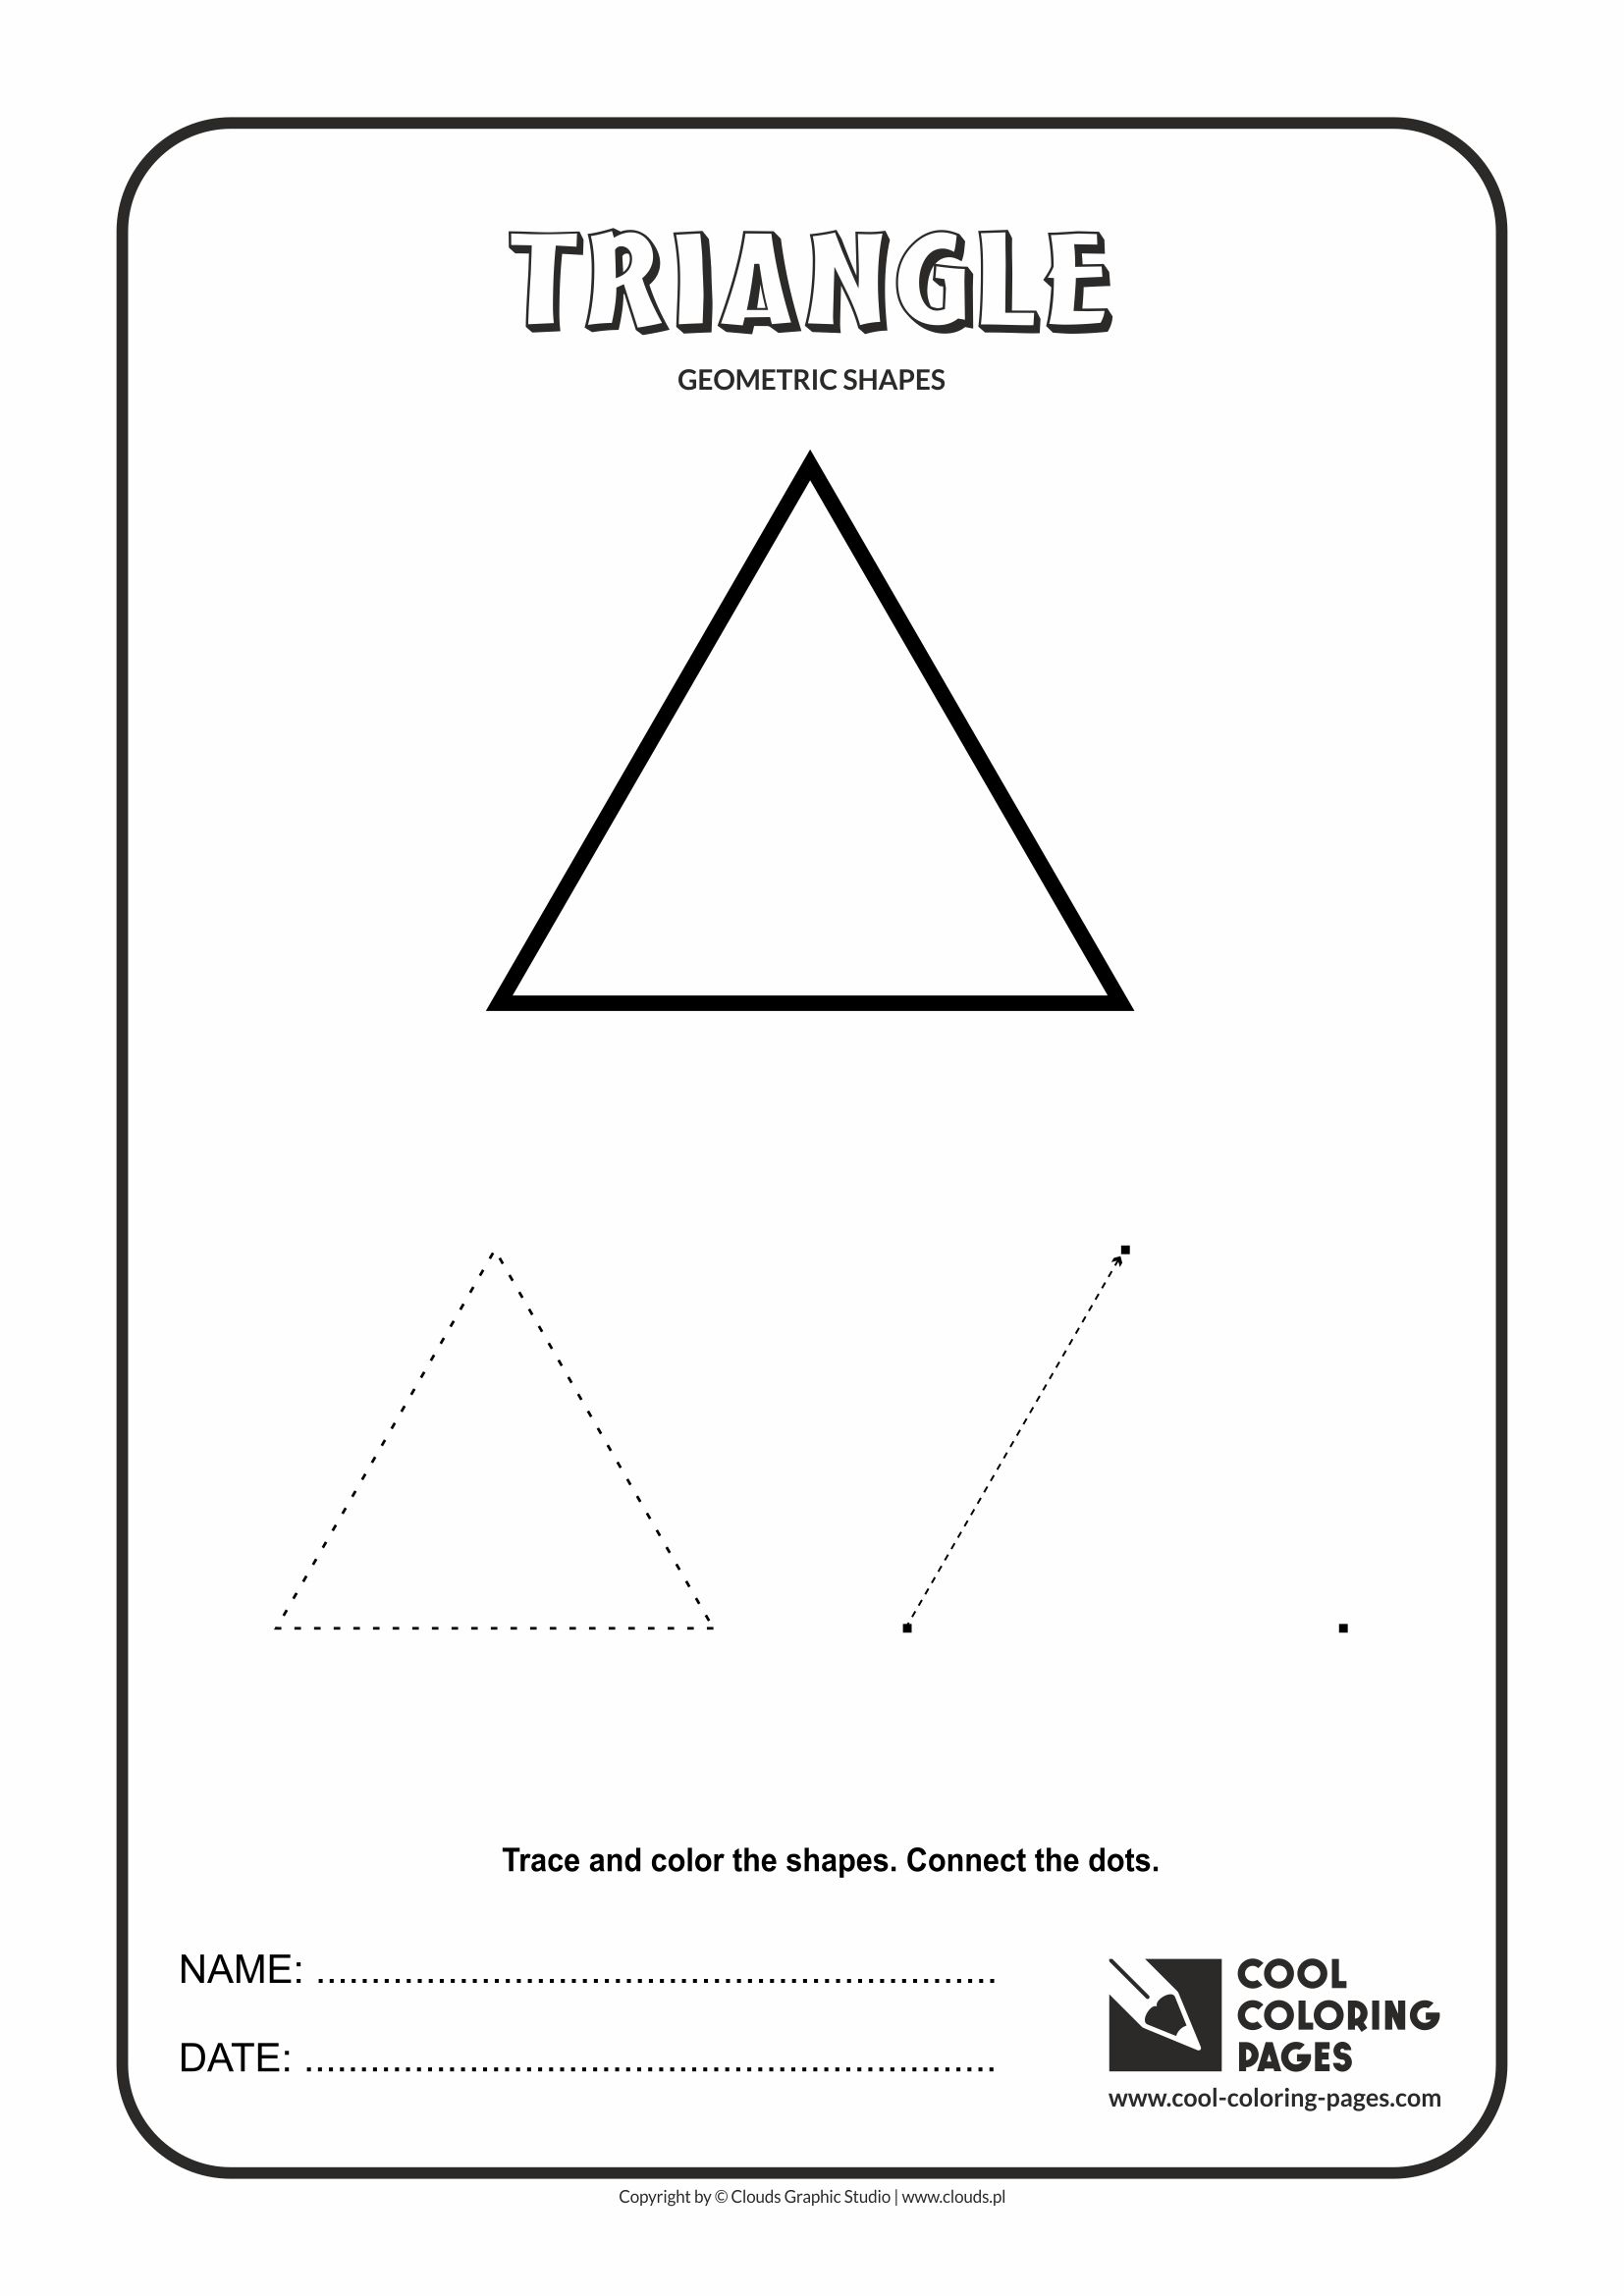 Cool Coloring Pages - Geometric shapes / Triangle